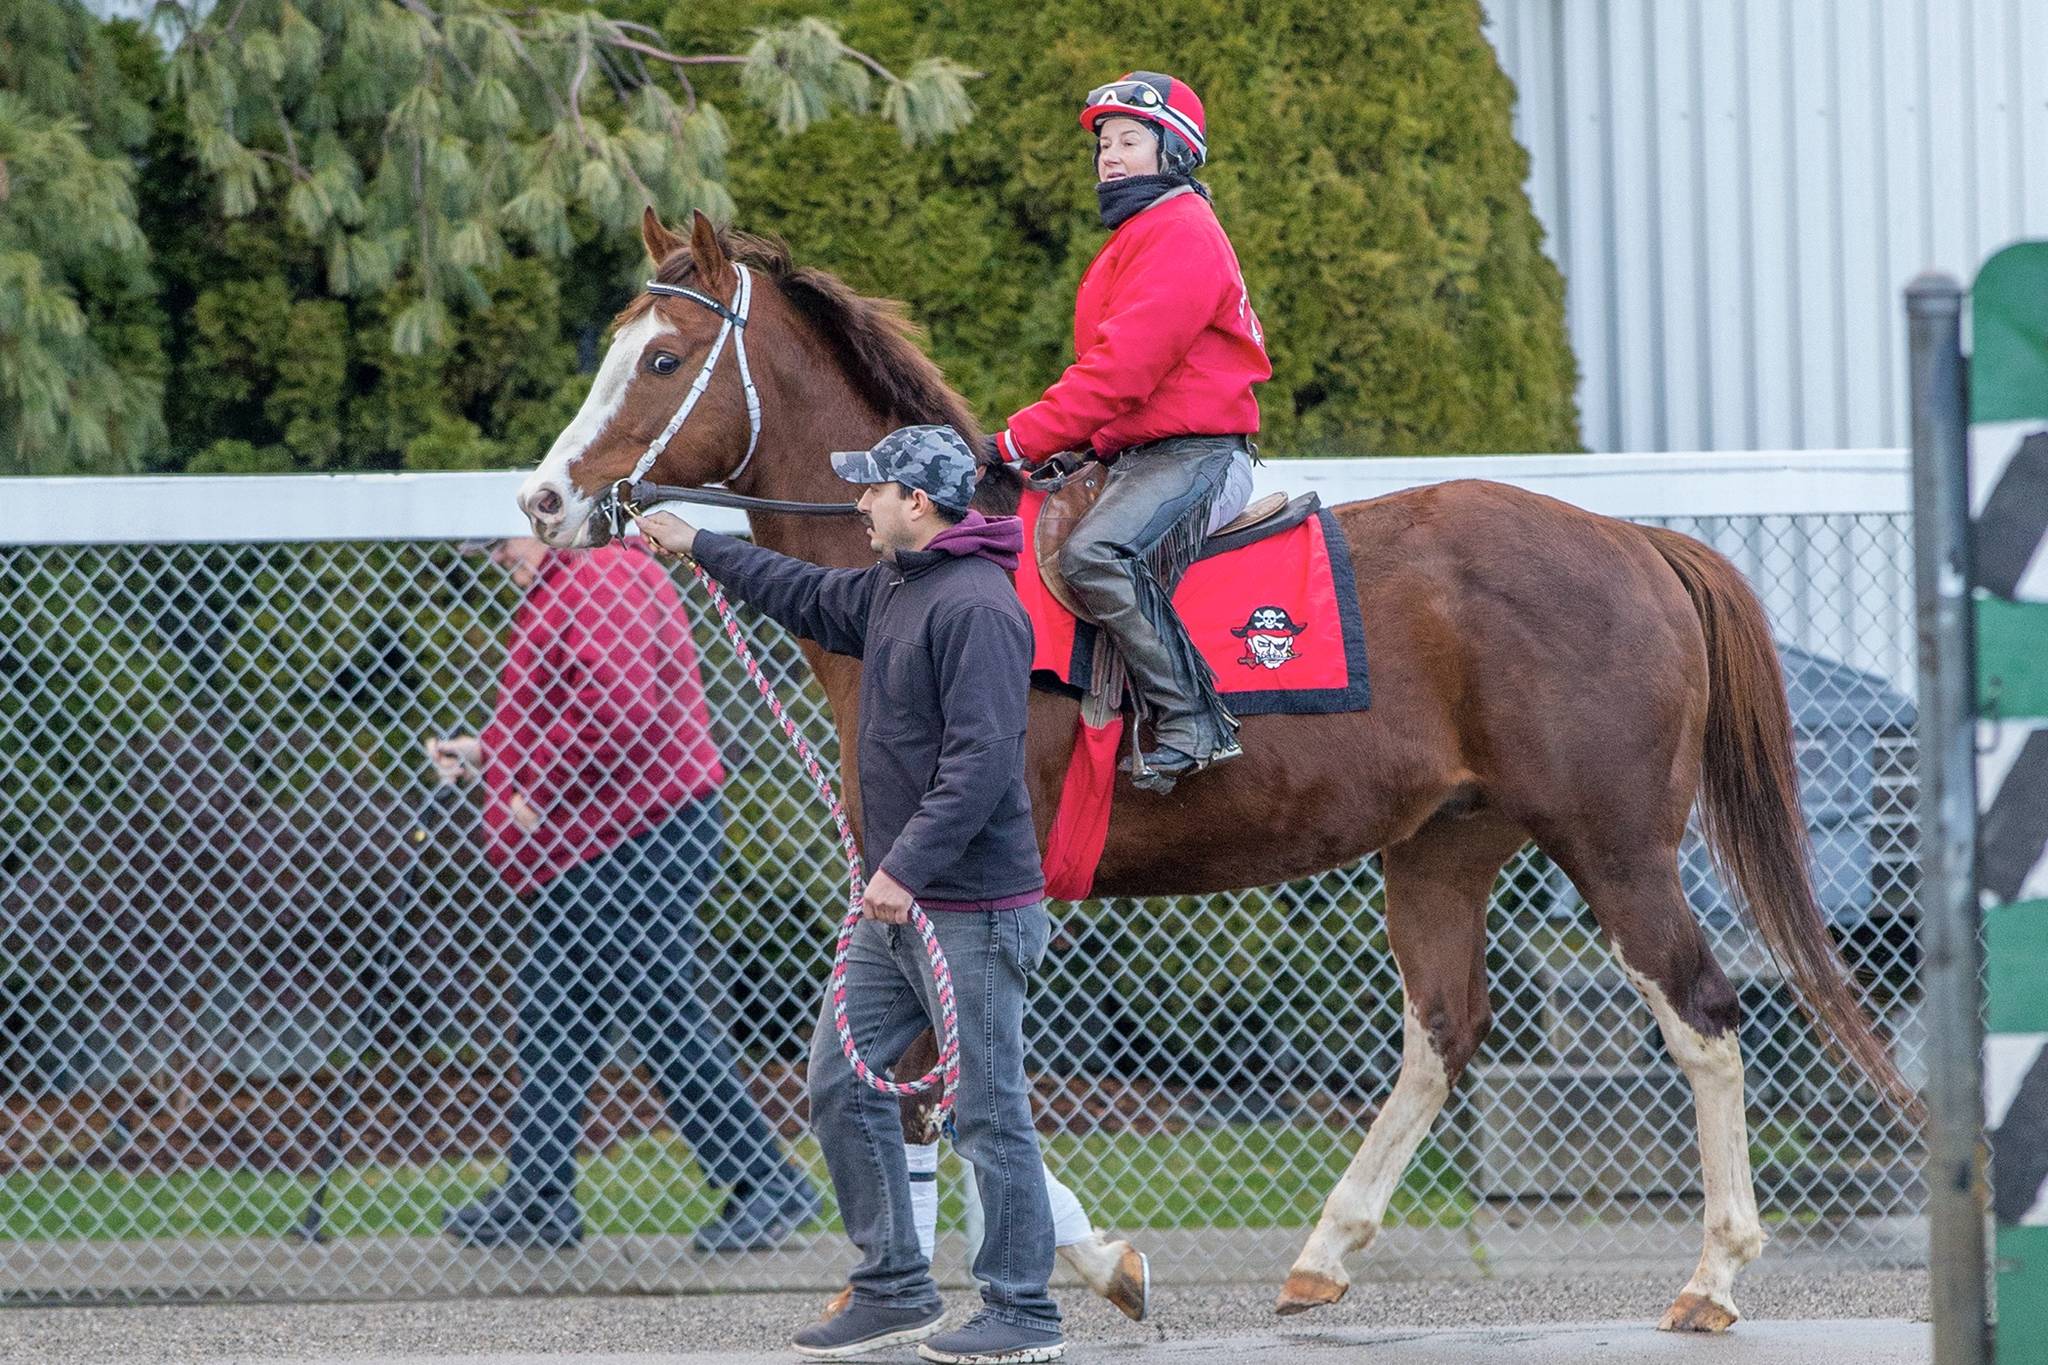 Horses are back: Thoroughbred training begins at Emerald Downs